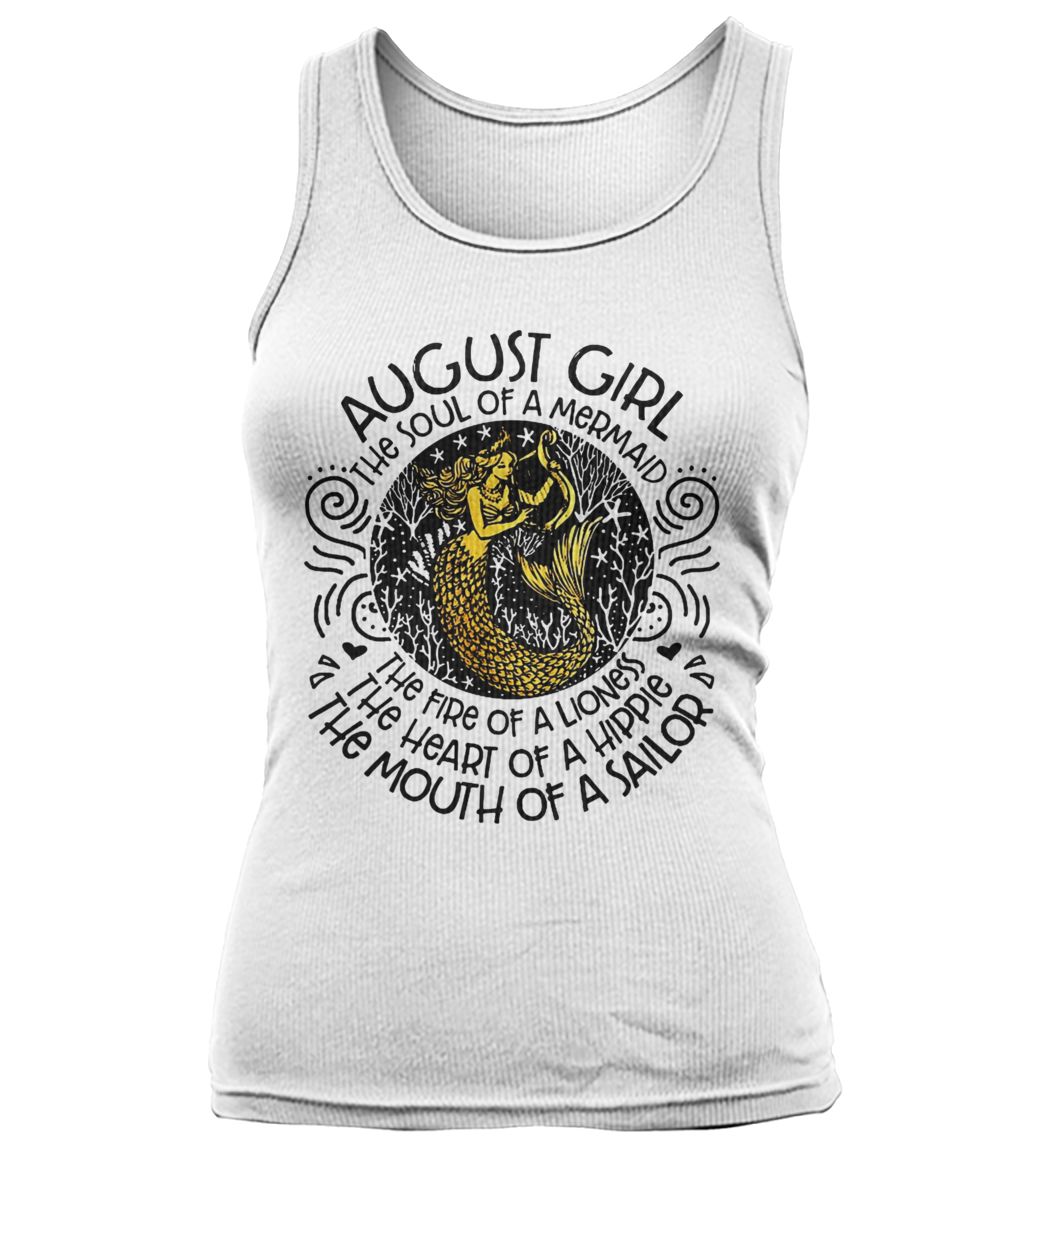 August girl the soul of a mermaid the fire of a lioness the heart of a hippie the mouth of a sailor women's tank top